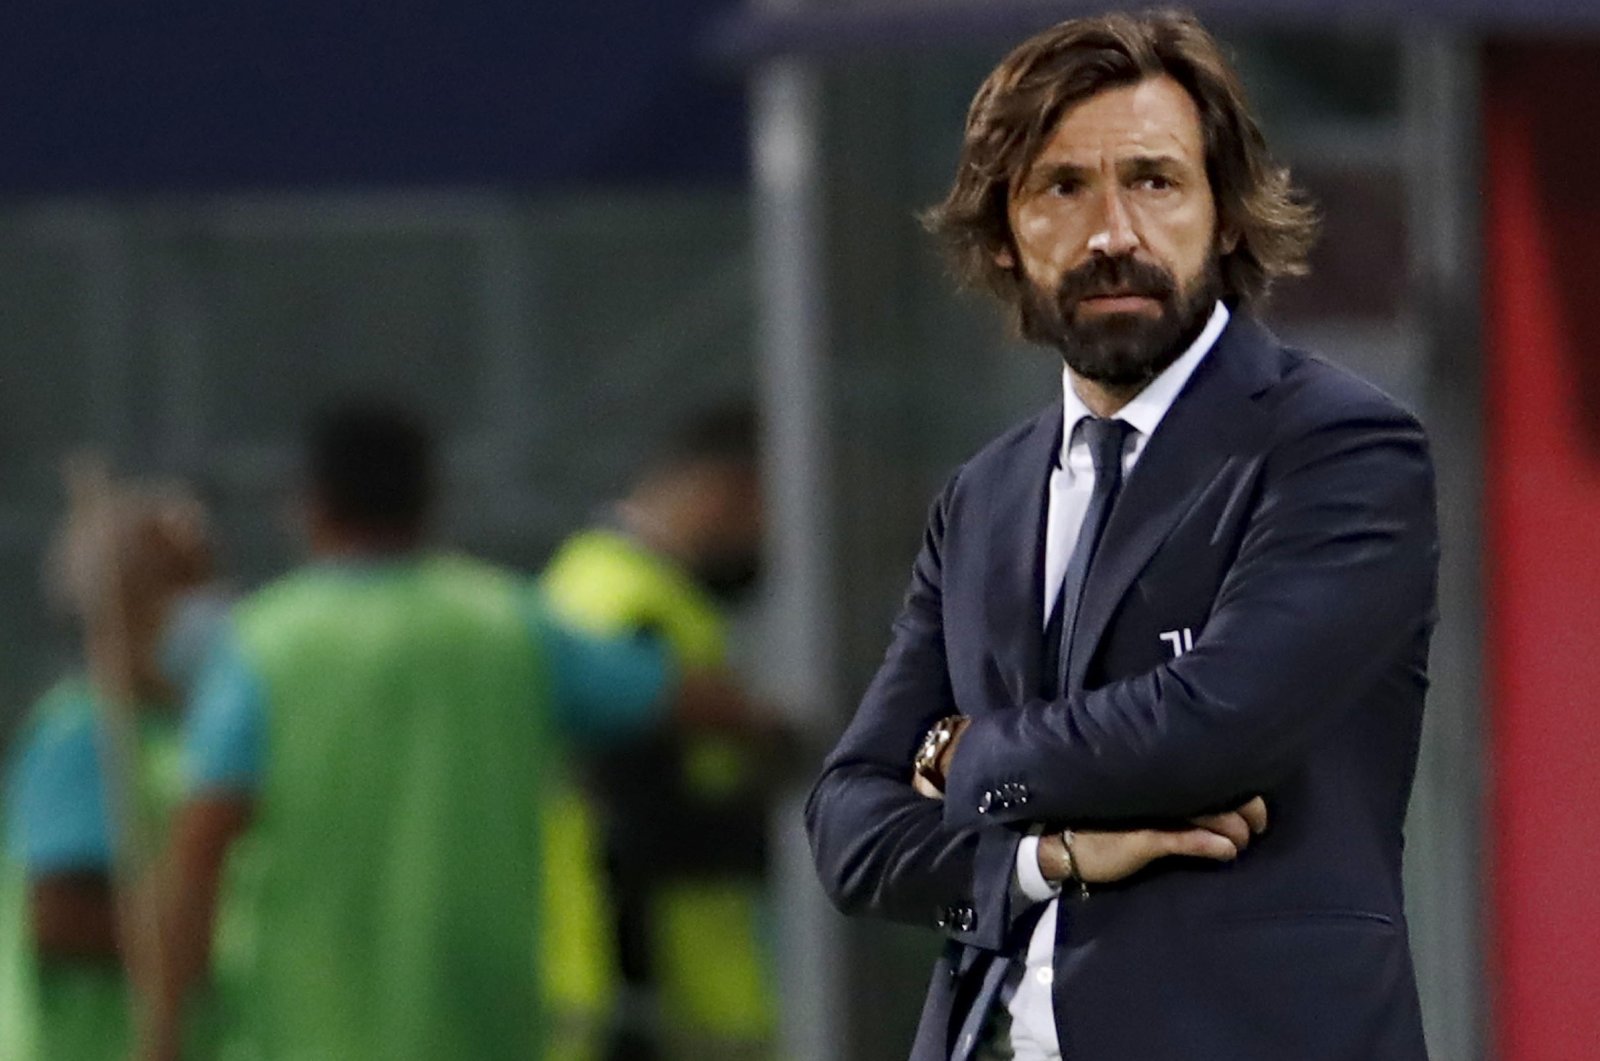 Then Juventus coach Andrea Pirlo reacts during a match against Bologna in the Serie A, Bologna, Italy, May 23, 2021. (EPA Photo)